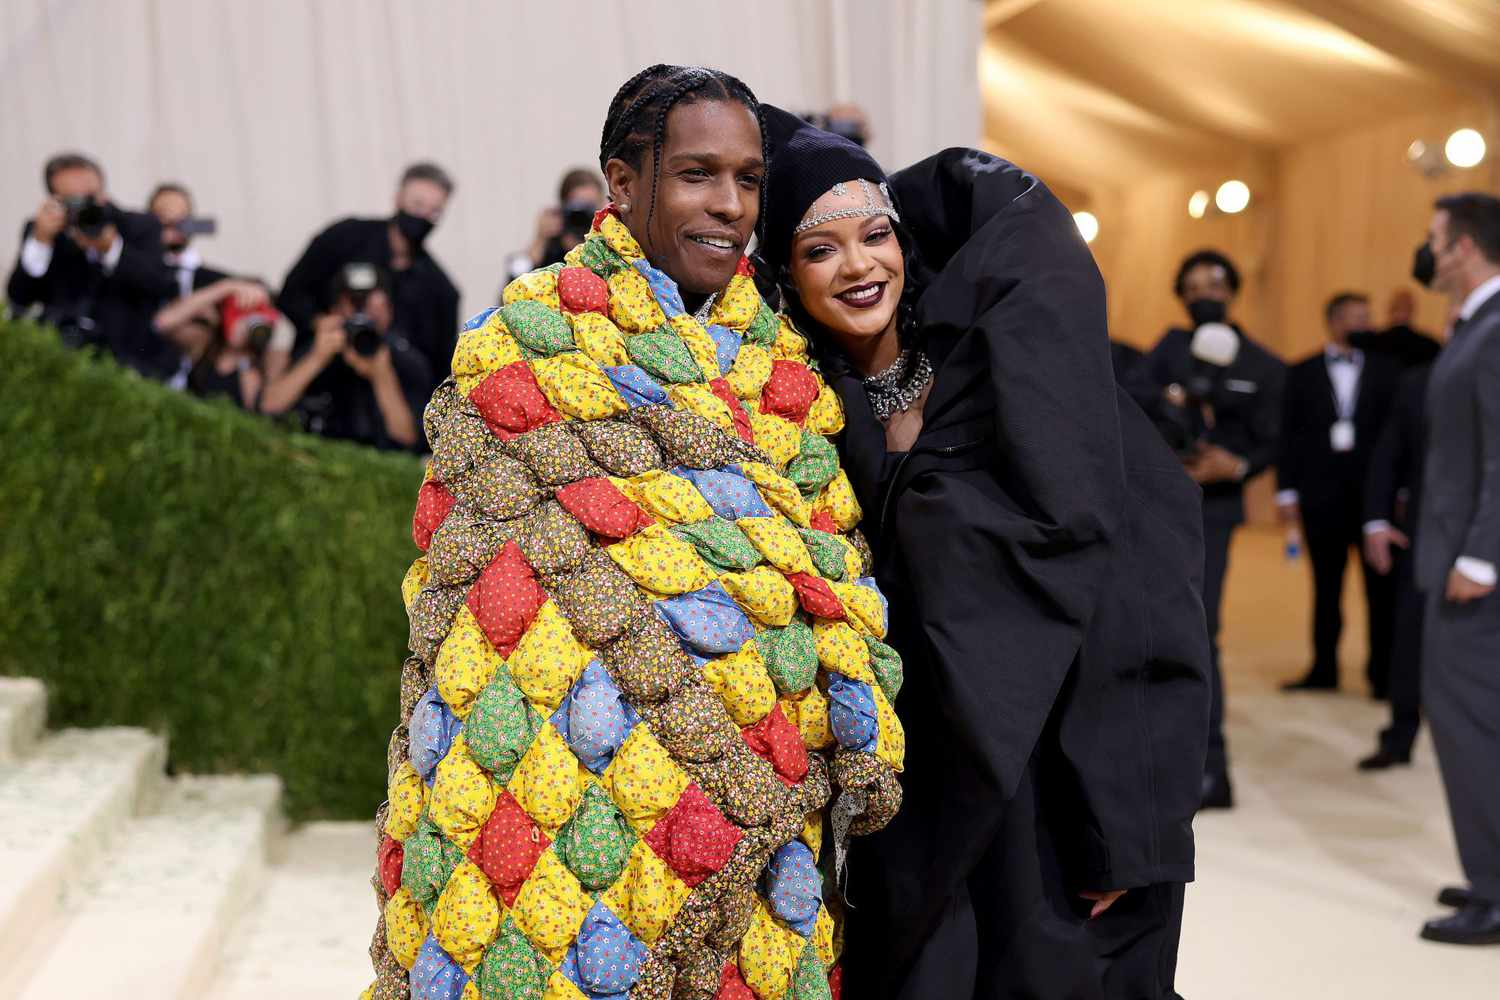 Rihanna and A$AP Rocky Make Their Red Carpet Debut at 2021 Met Gala |  PEOPLE.com